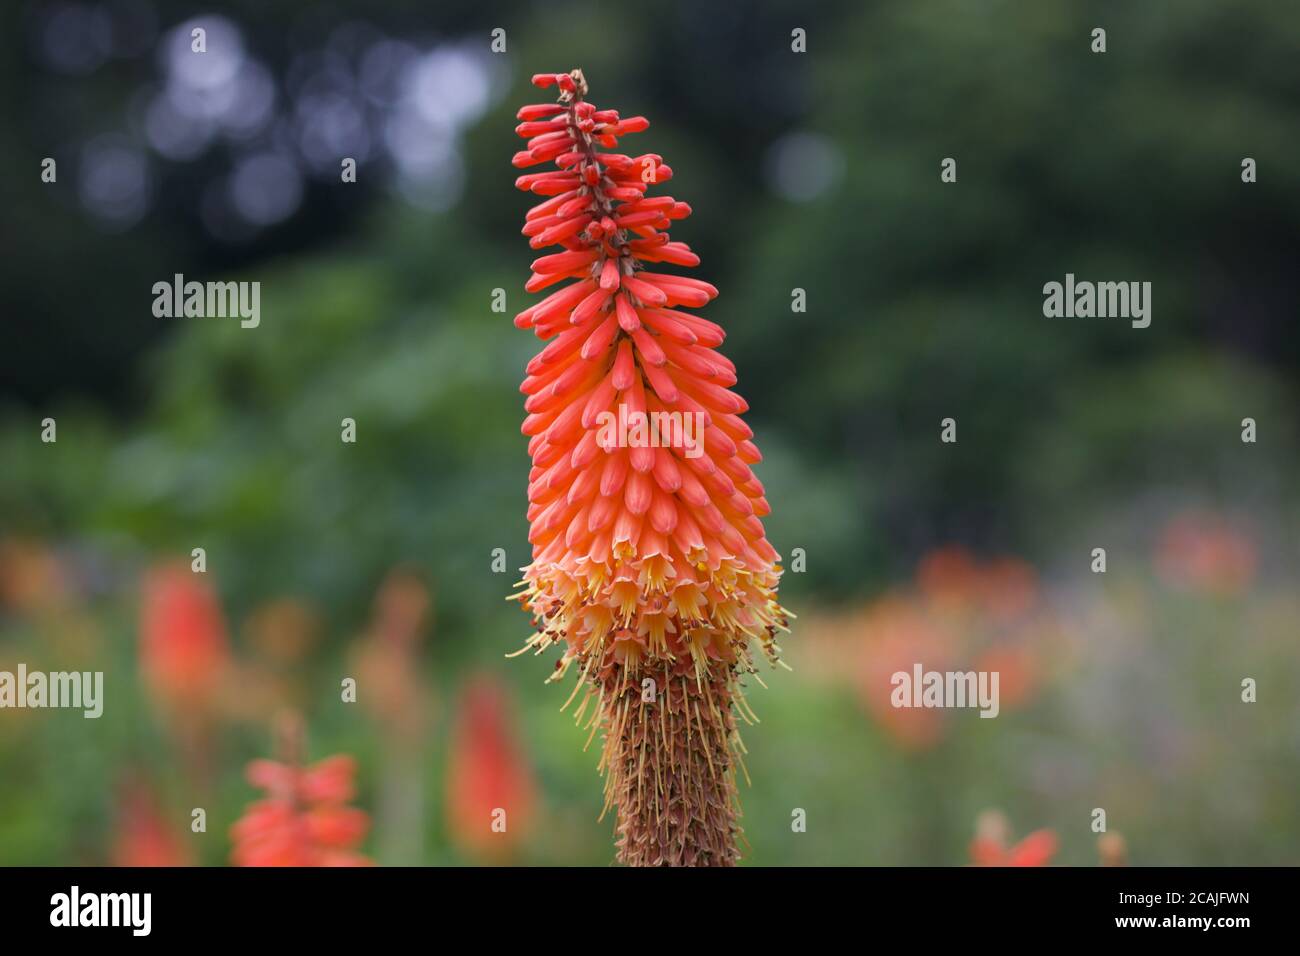 Beautiful orange red hot poker against soft blurred background with copy space Stock Photo